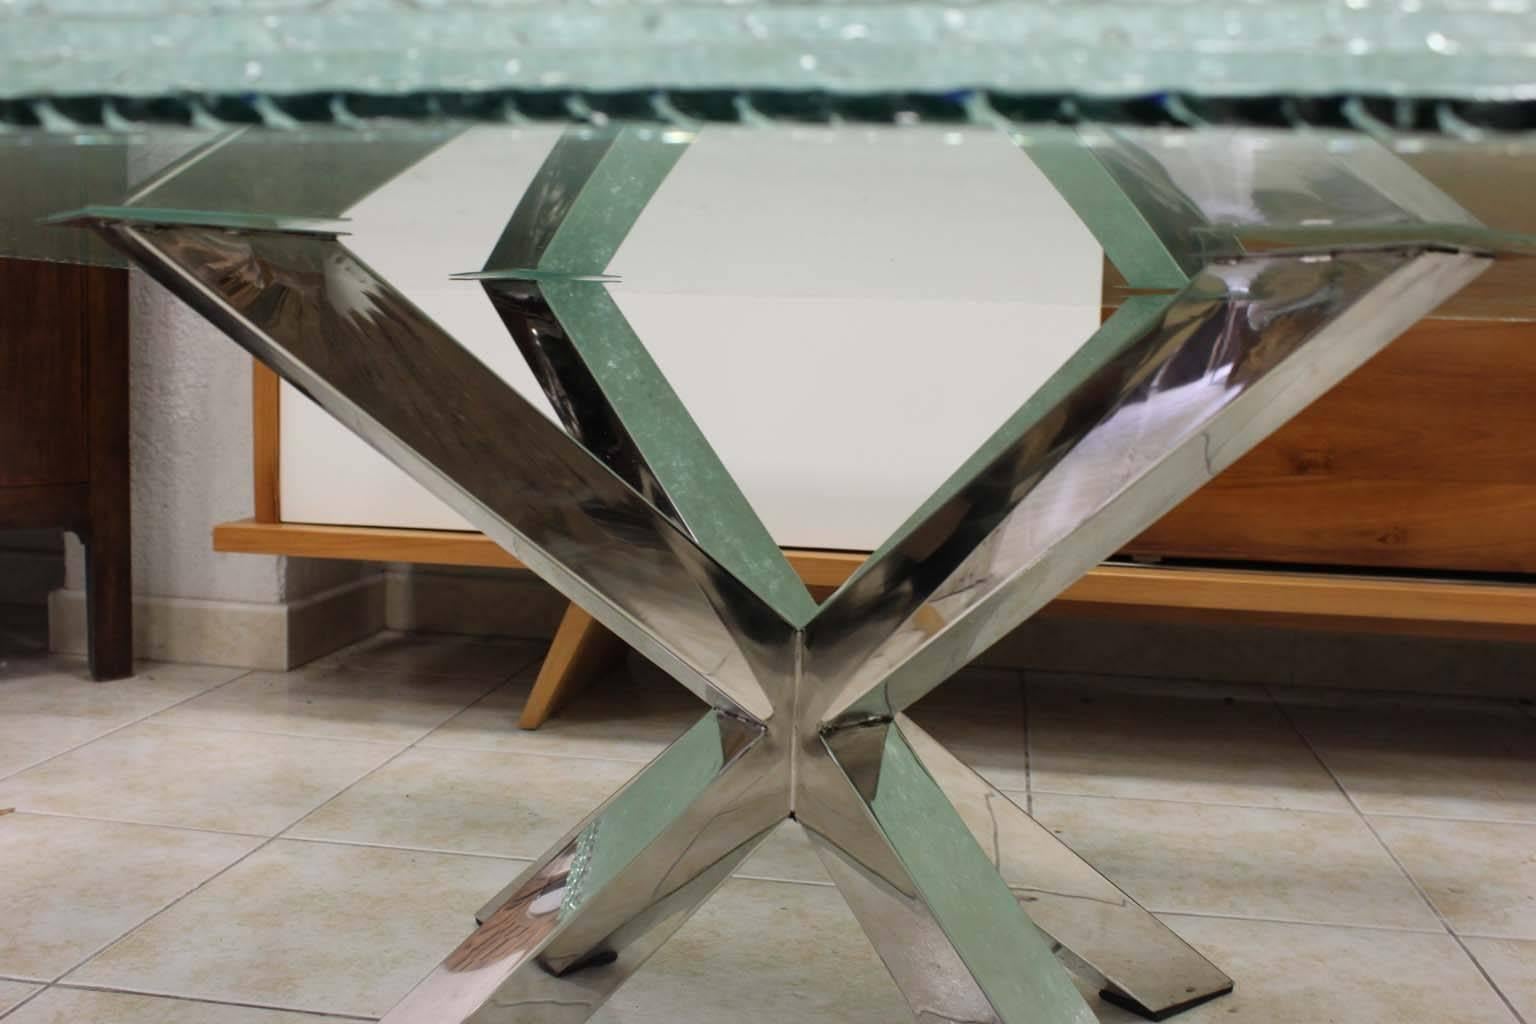 20th Century Modern Coffee Table with Glass Crystals, Stainless Steel Base For Sale